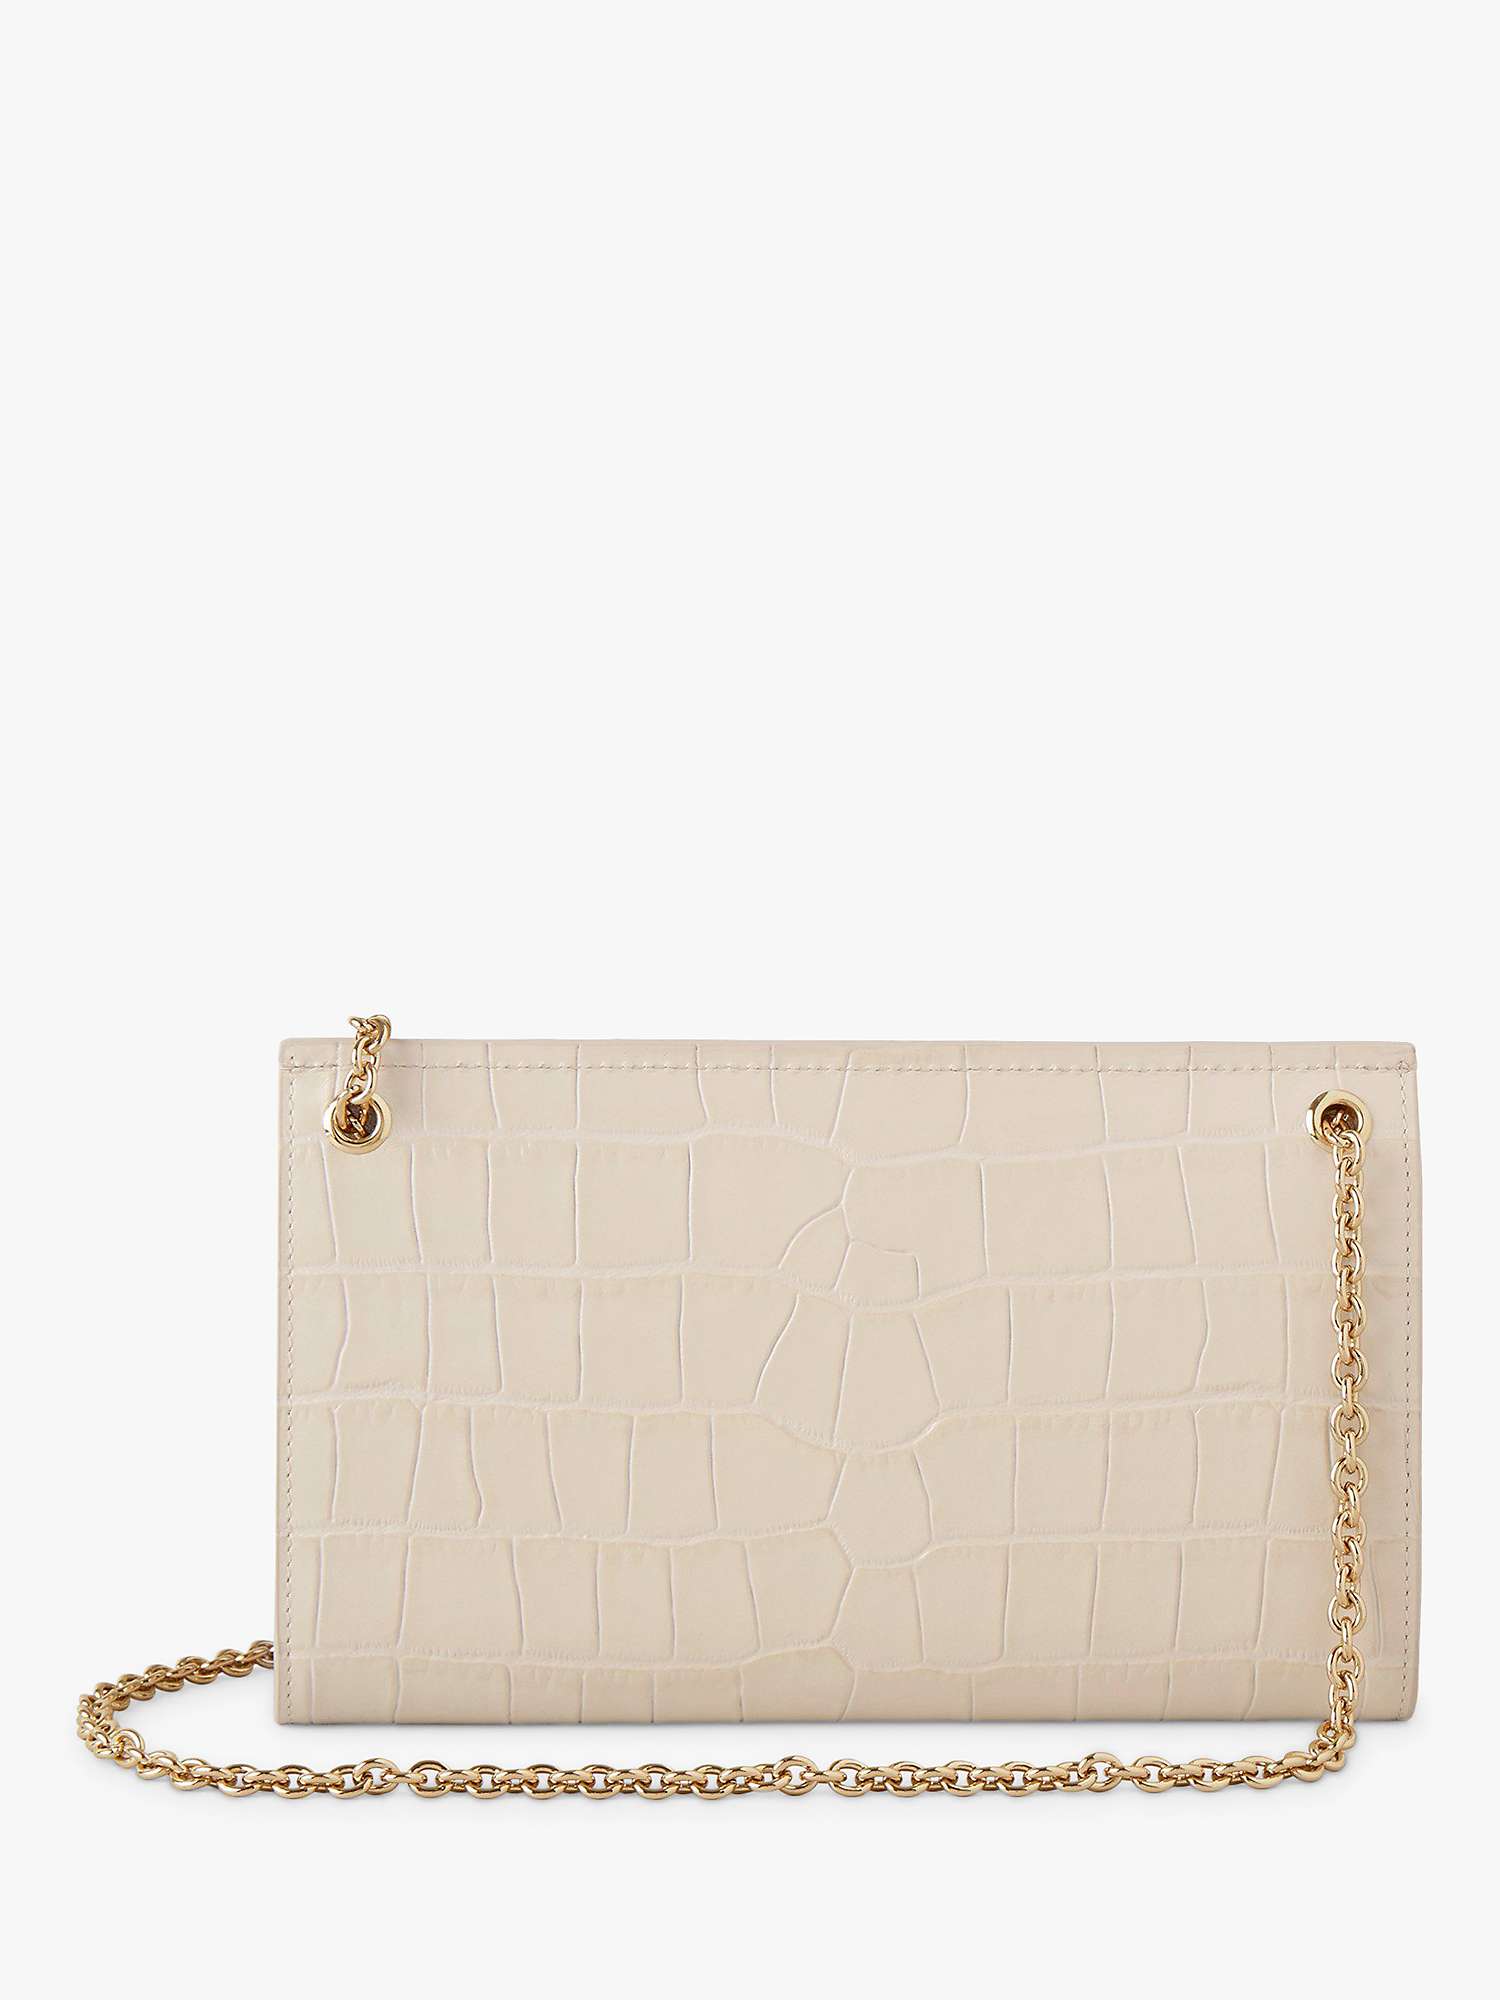 Buy Mulberry Amberley Shiny Croc Effect Leather Clutch Bag, Eggshell Online at johnlewis.com